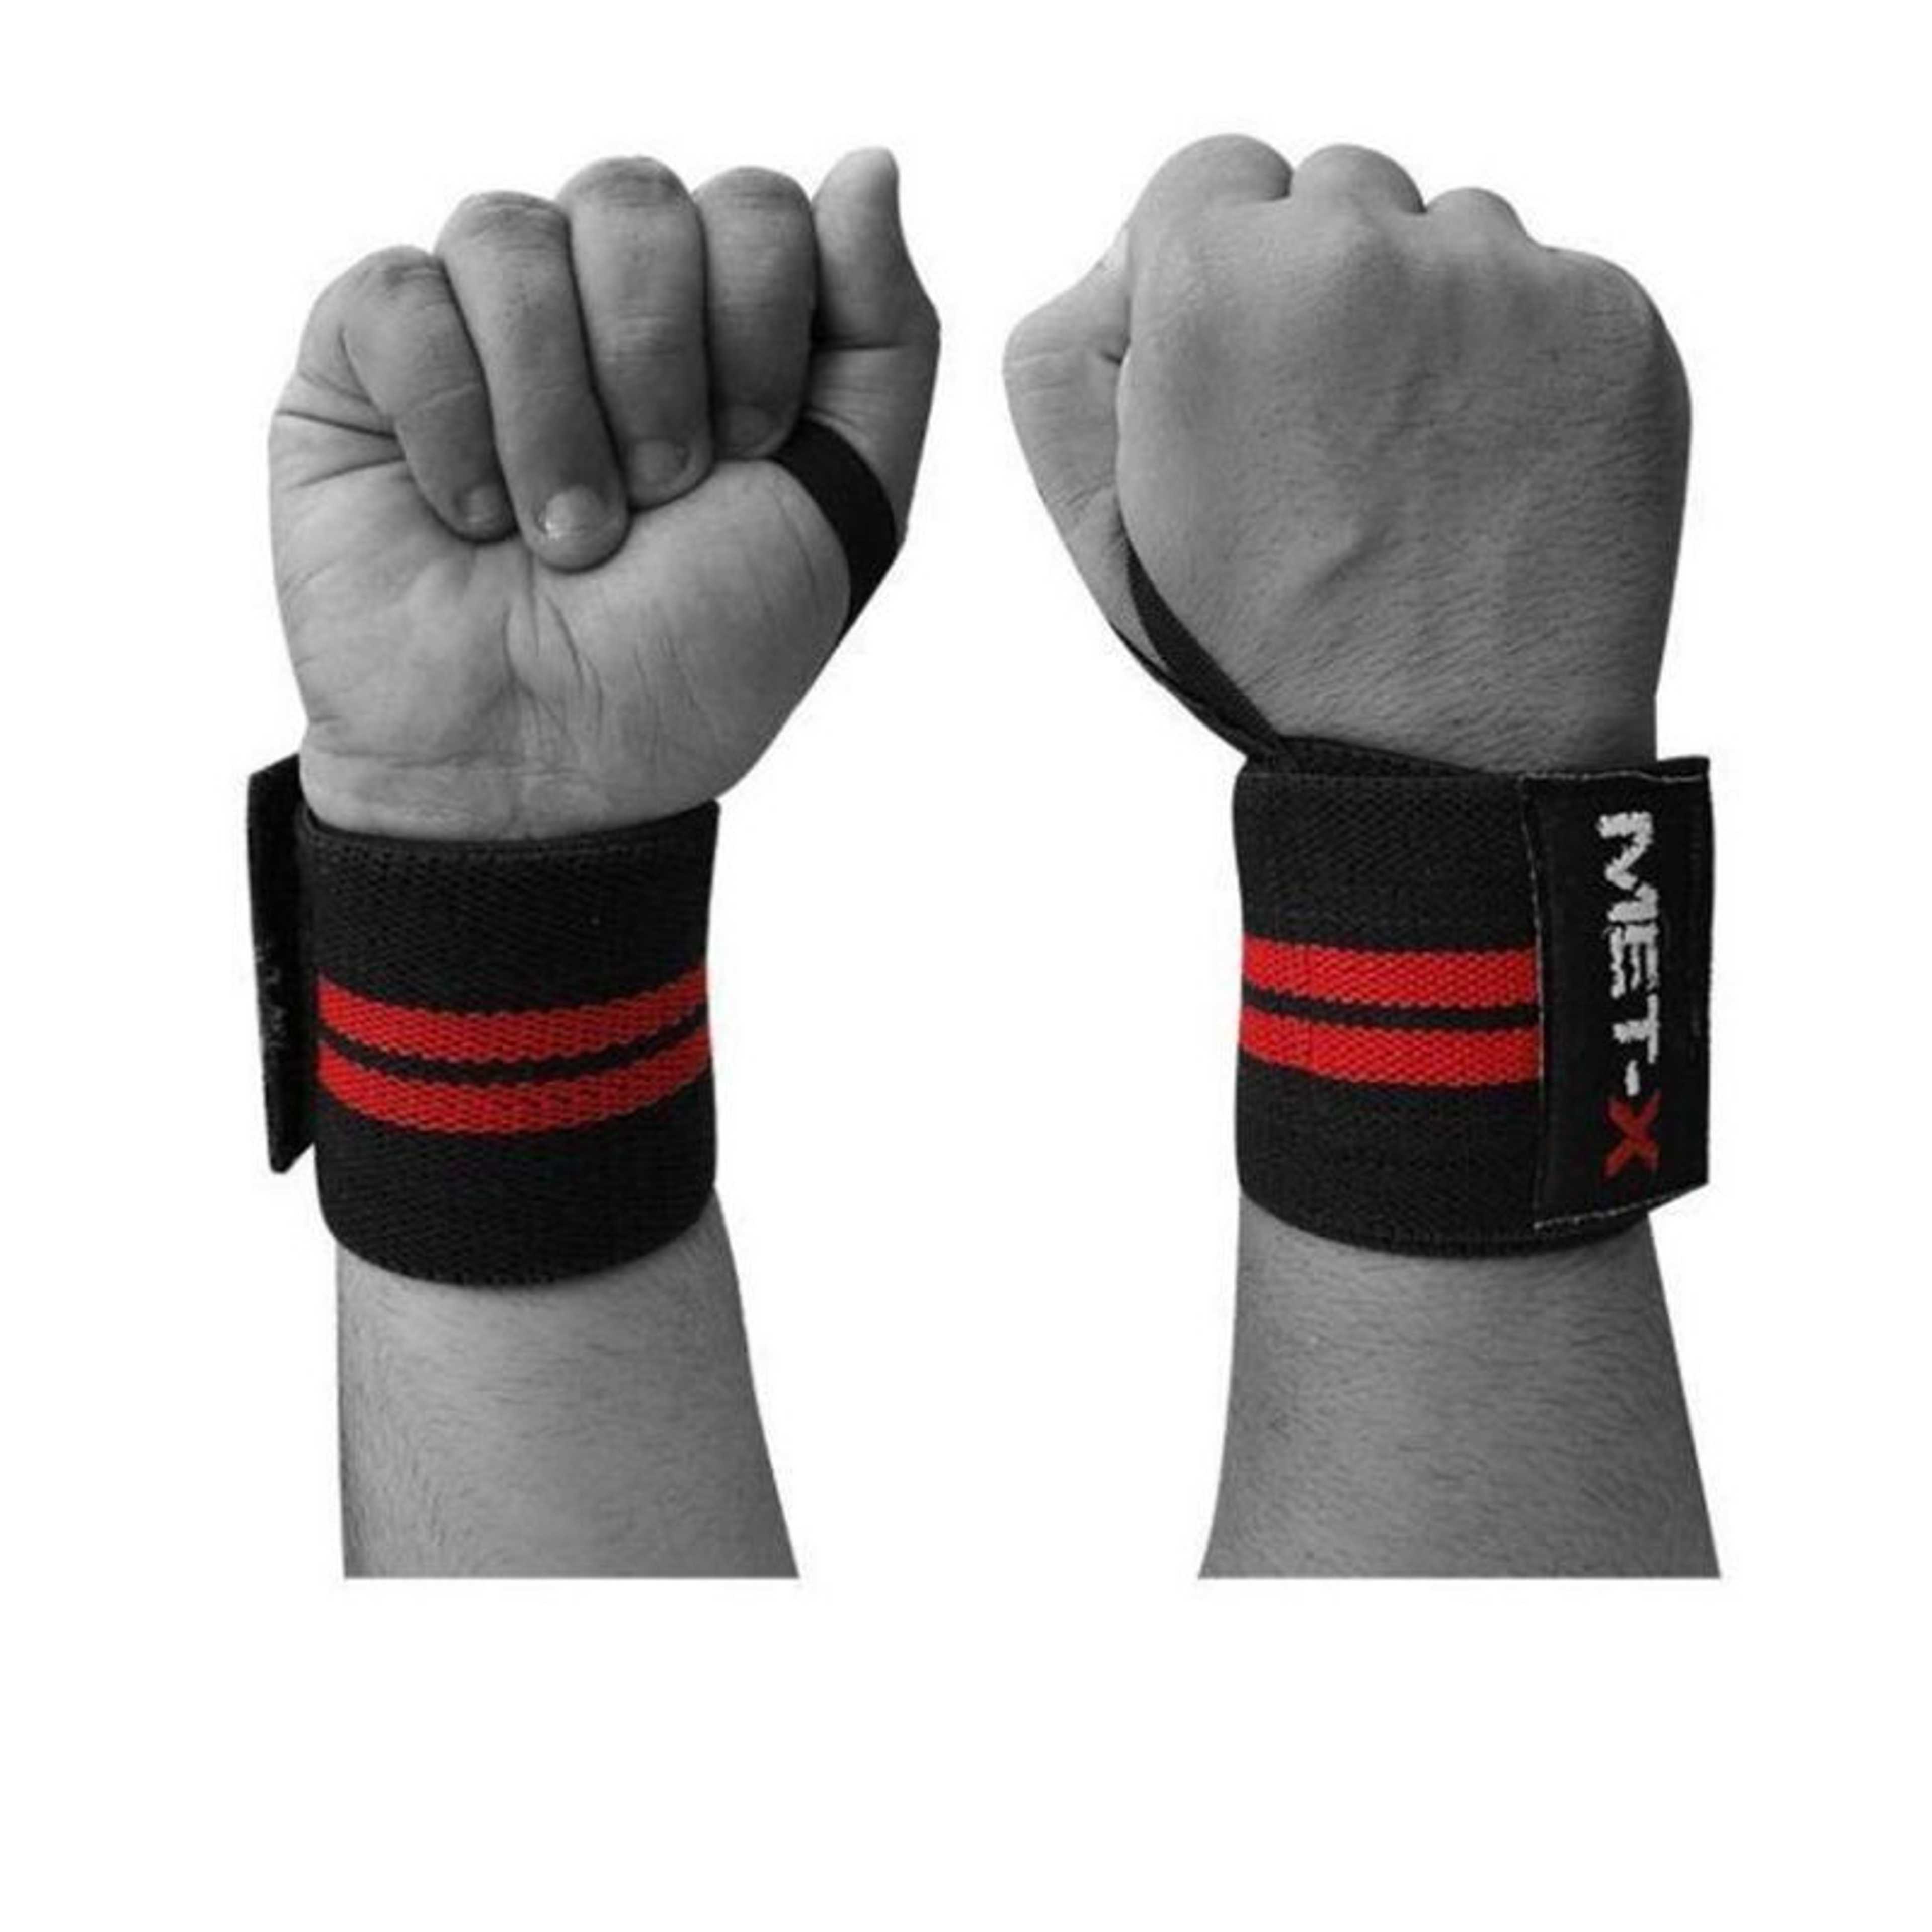 Weight Lifting - Gym Strap Hand Support - Black